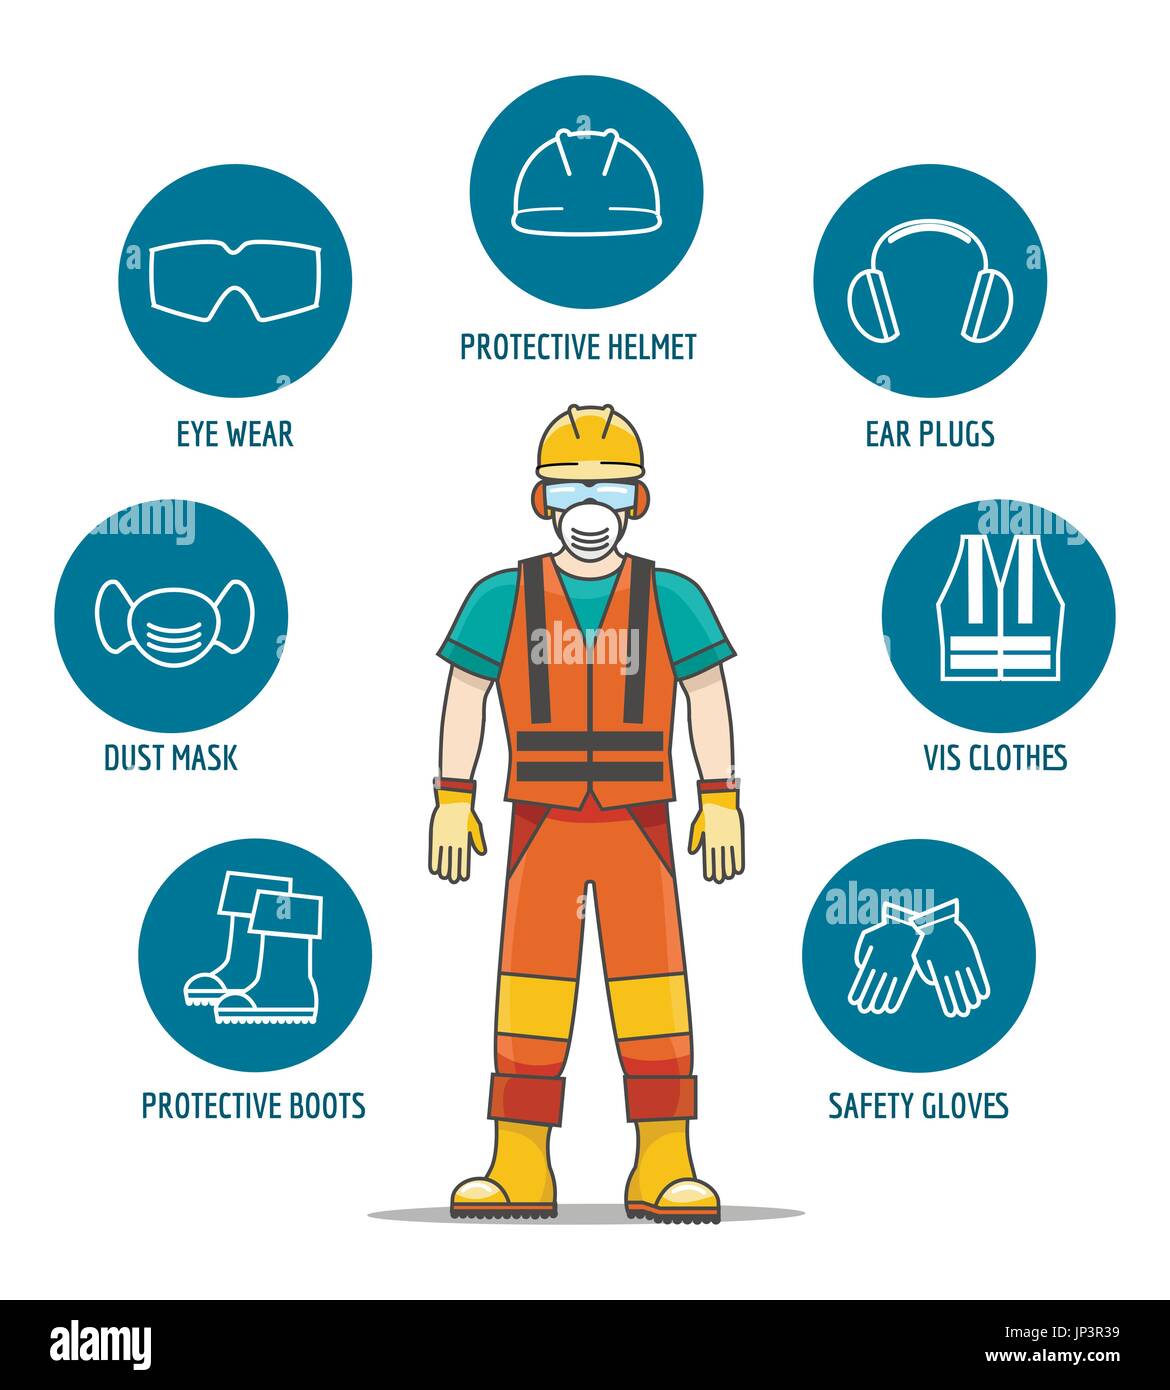 Personal Protective Equipment Safety Signs